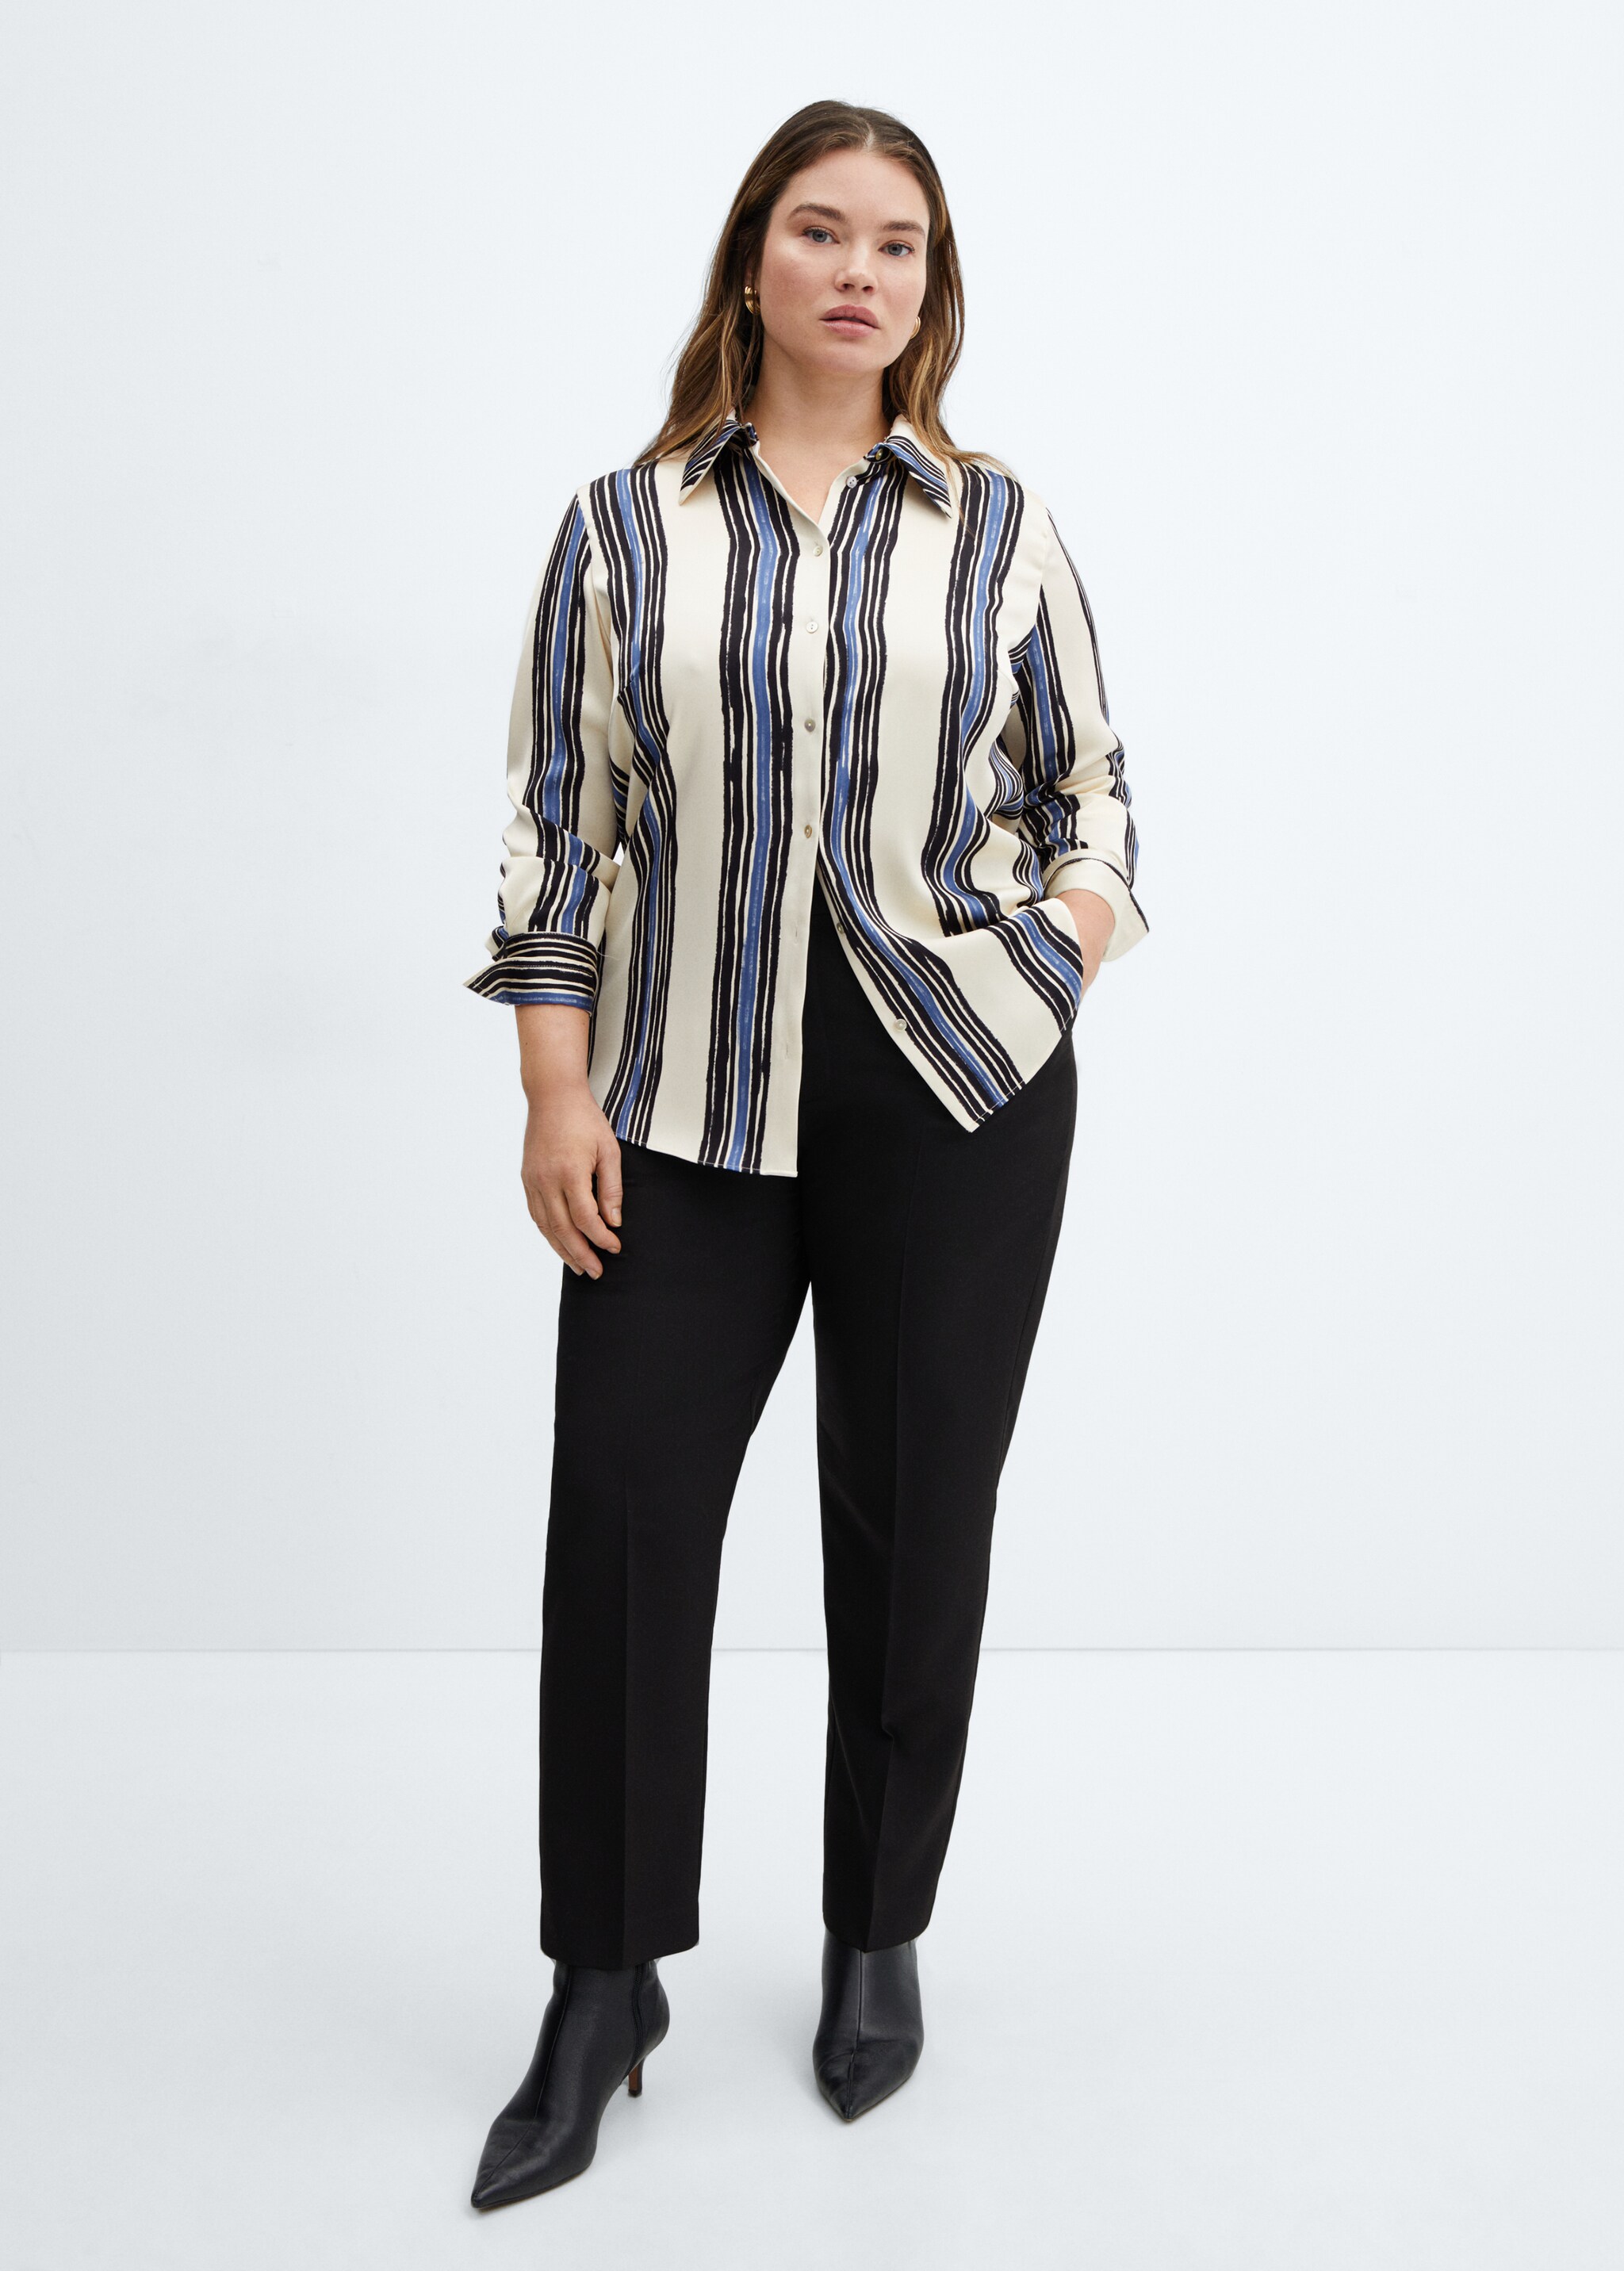 Satin striped shirt - Details of the article 3